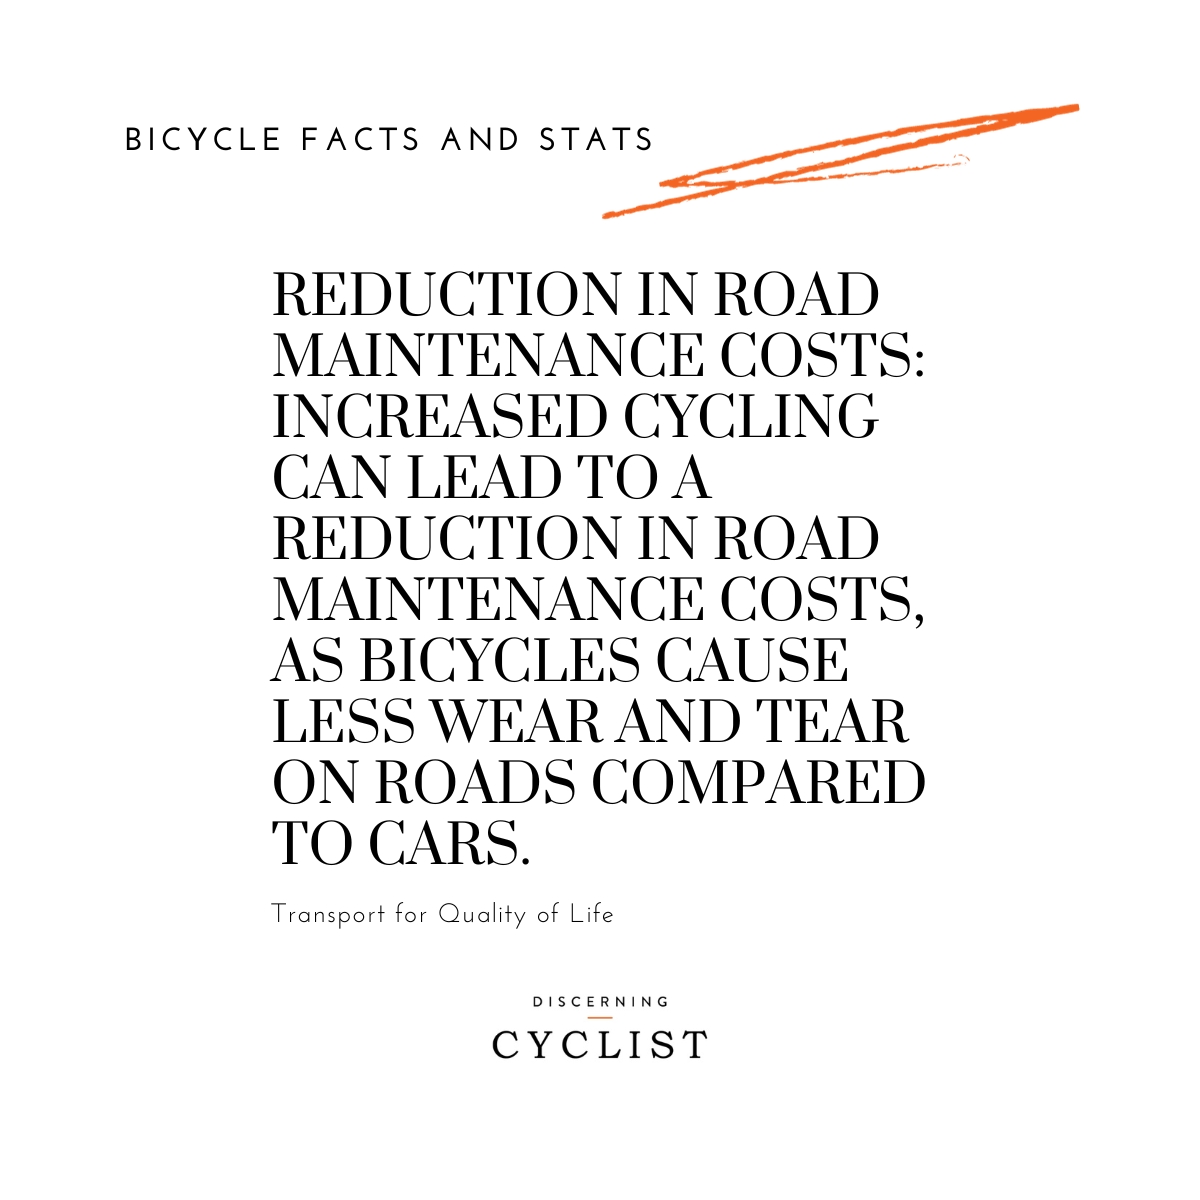 Reduction in Road Maintenance Costs: Increased cycling can lead to a reduction in road maintenance costs, as bicycles cause less wear and tear on roads compared to cars.